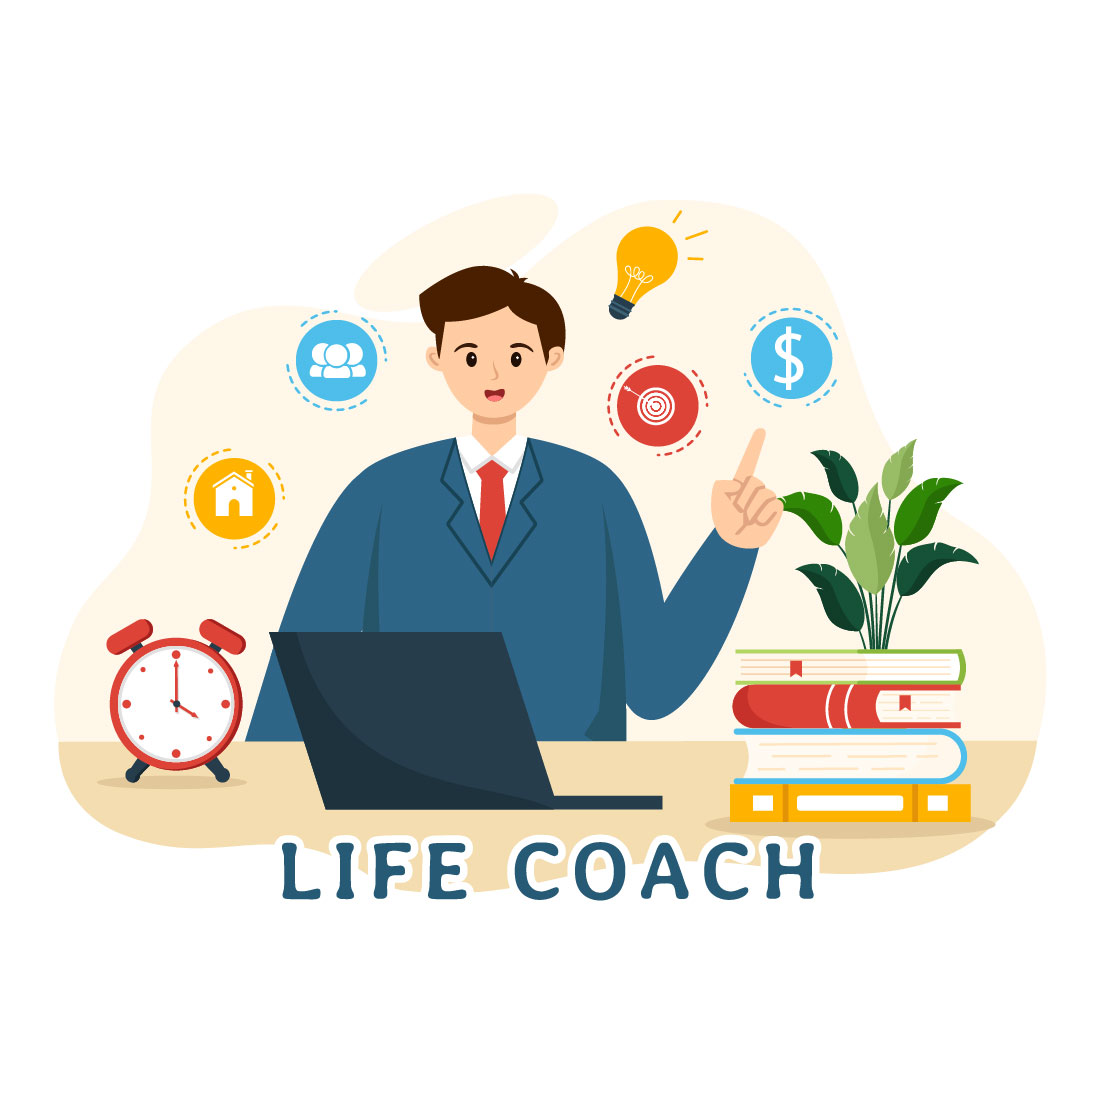 12 Life Coach Illustration preview image.